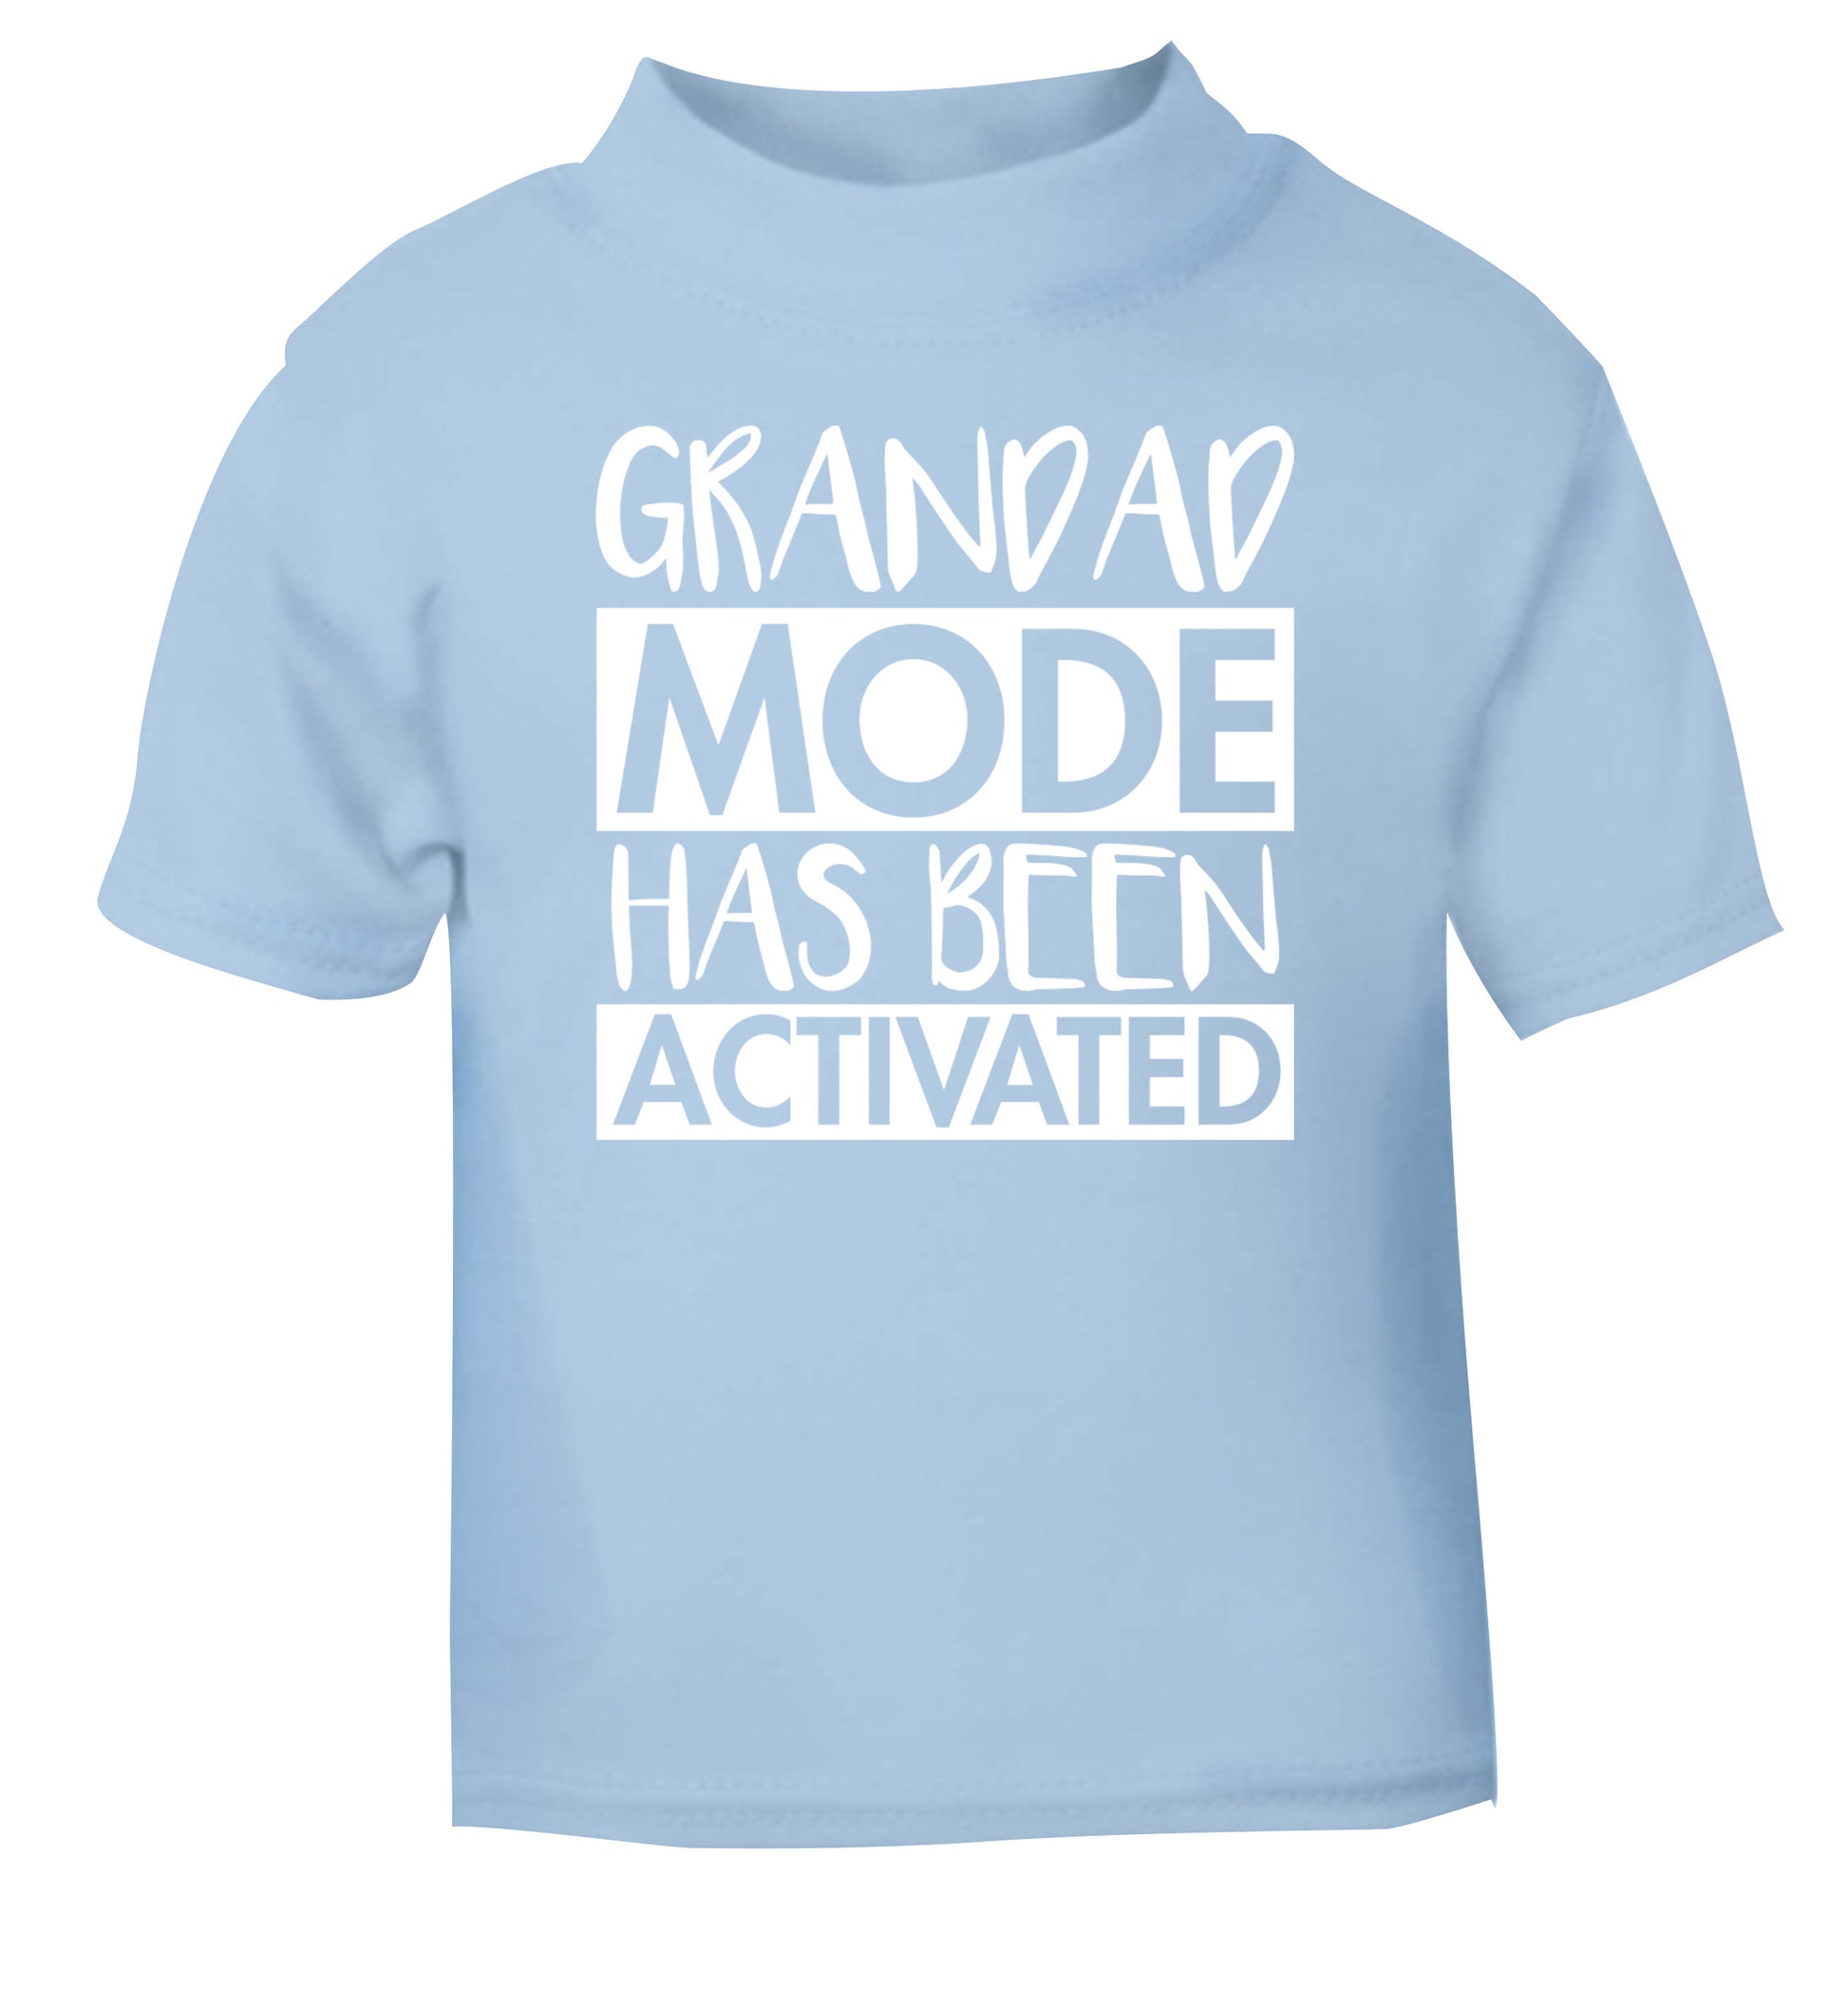 Grandad mode activated light blue Baby Toddler Tshirt 2 Years